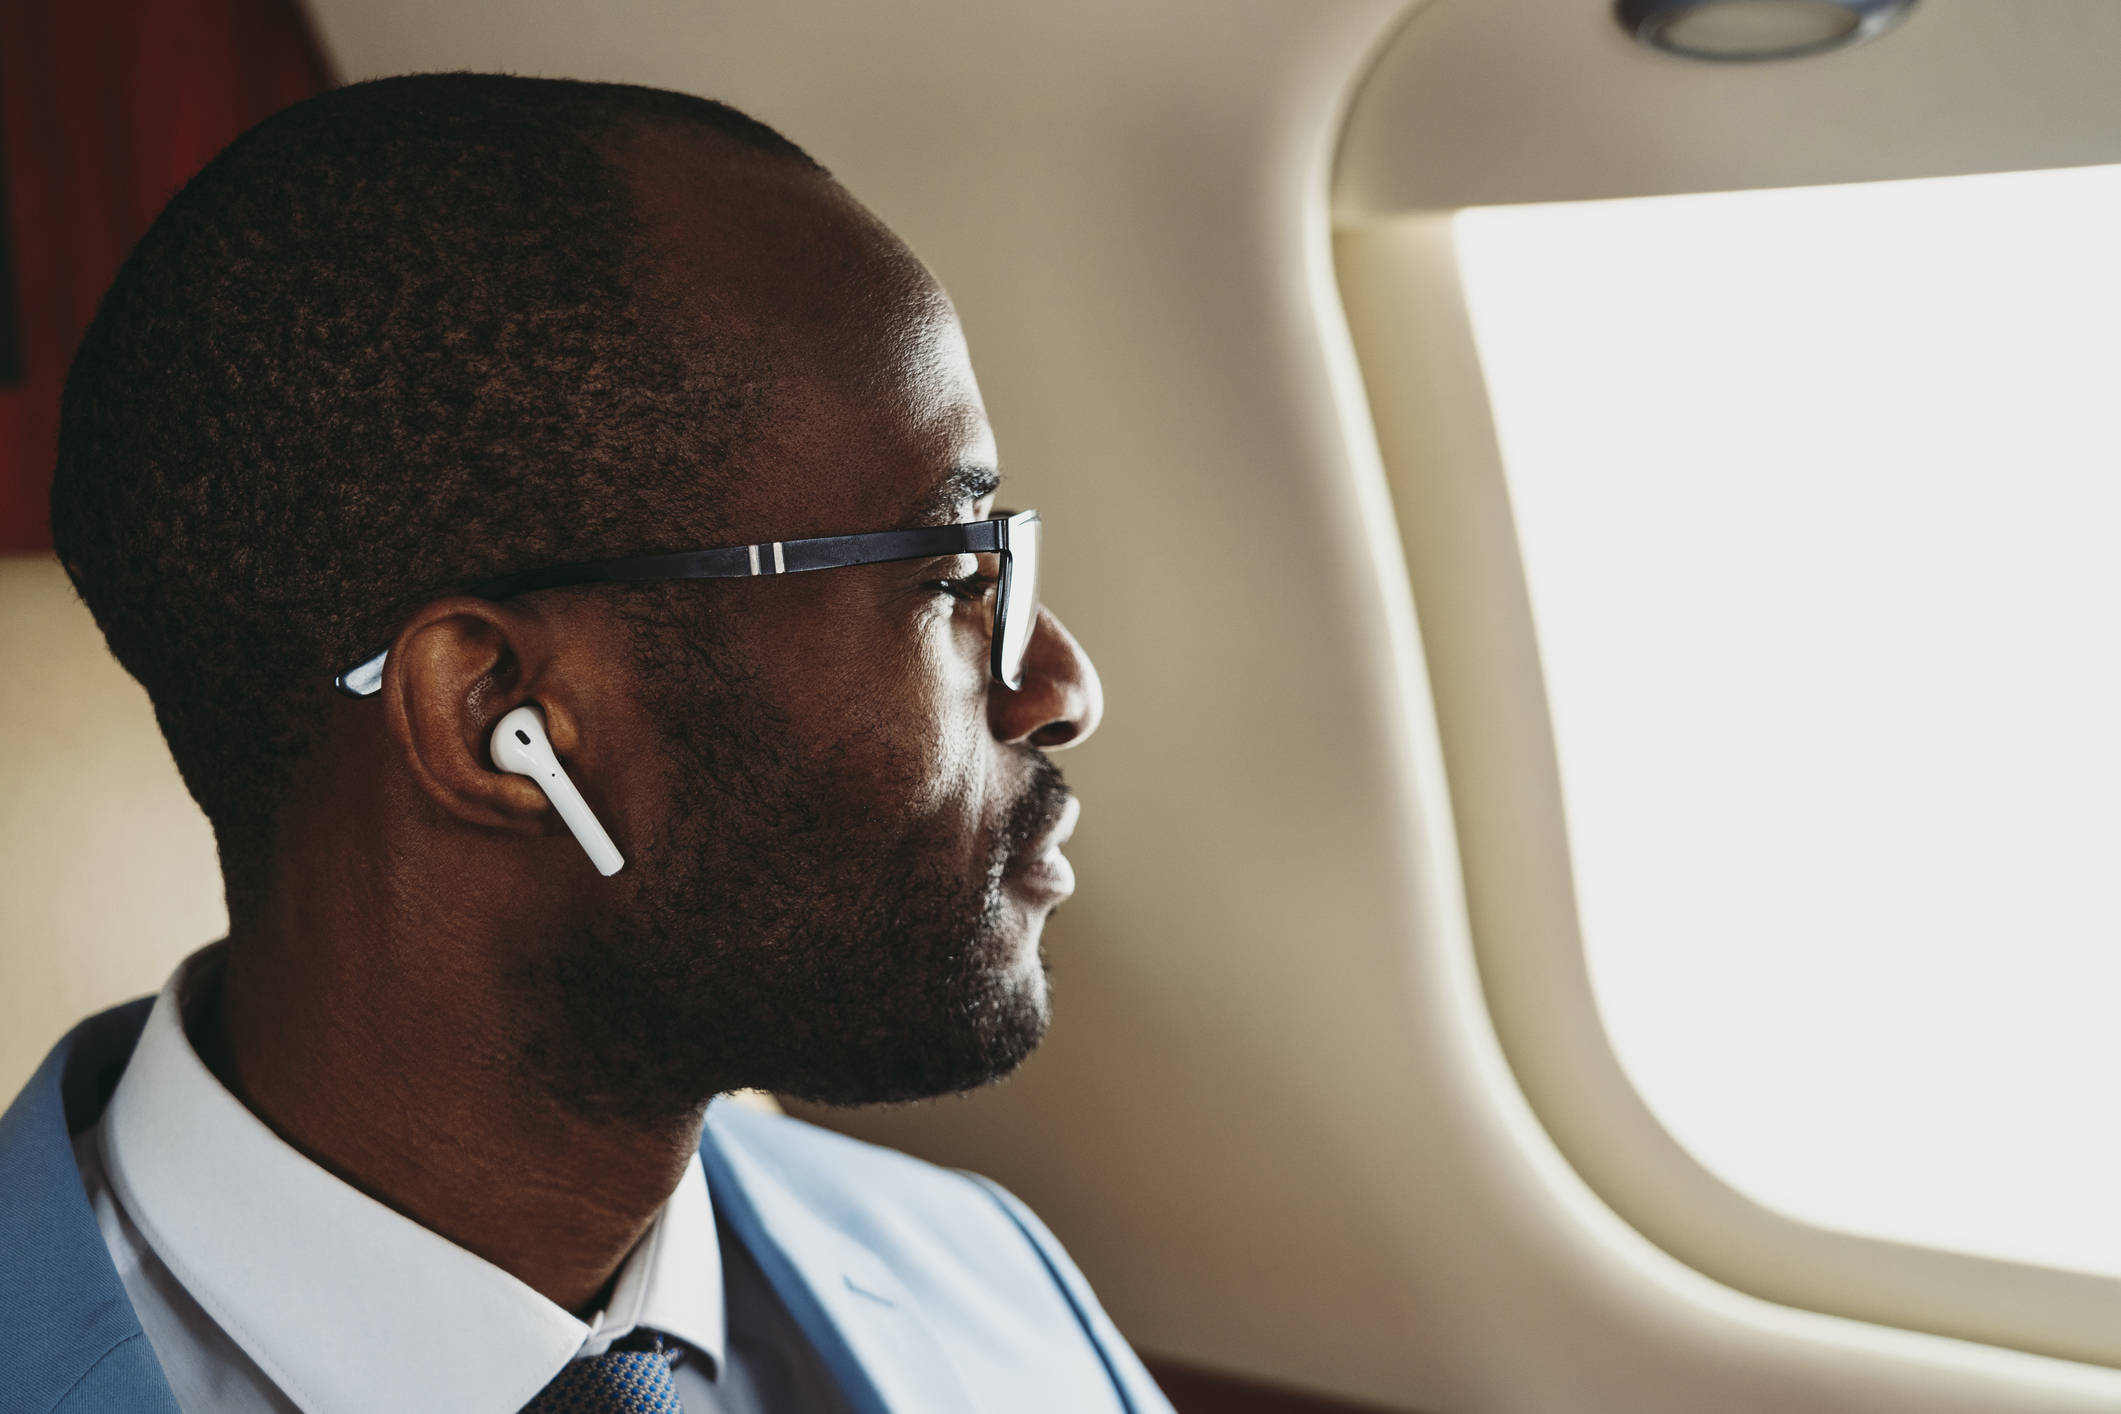 Man in suit with earphones looks out airplane window